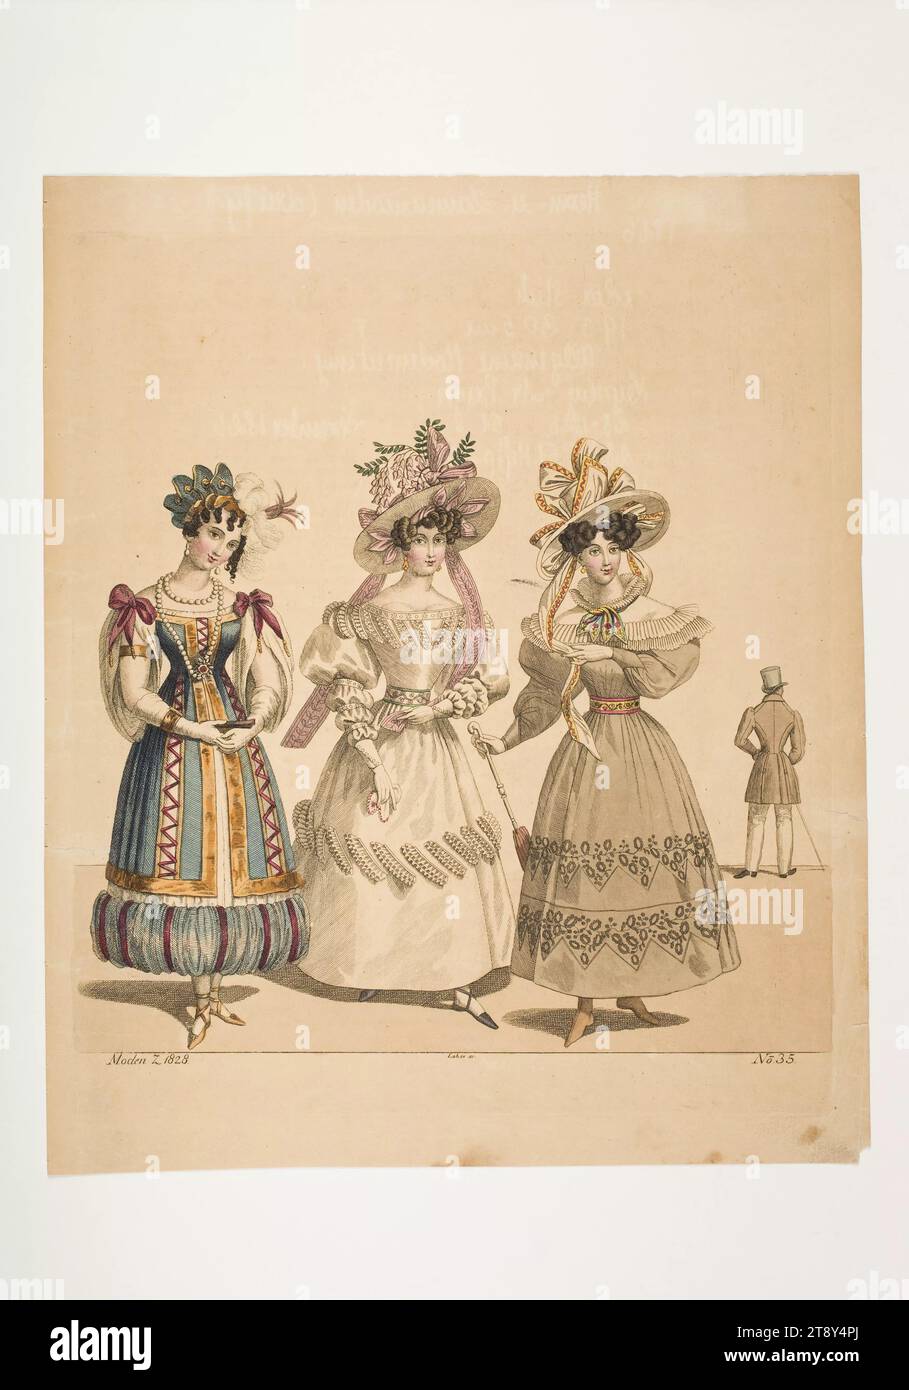 Fashion picture: four figures, a man's suit, two promenade dresses, an English fancy ball gown, Unknown, 1828, paper, colored, copperplate engraving, height 26 cm, width 20, 5 cm, plate size 23×19, 8 cm, fashion, bourgeoisie, Biedermeier, public festivals and celebrations, dance, night life, costumes, fashion boards, headgear, clothing for official occasions, dress, robe: Ball gown, dandy, beau, coat, woman, man, dress, robe, The Vienna Collection Stock Photo